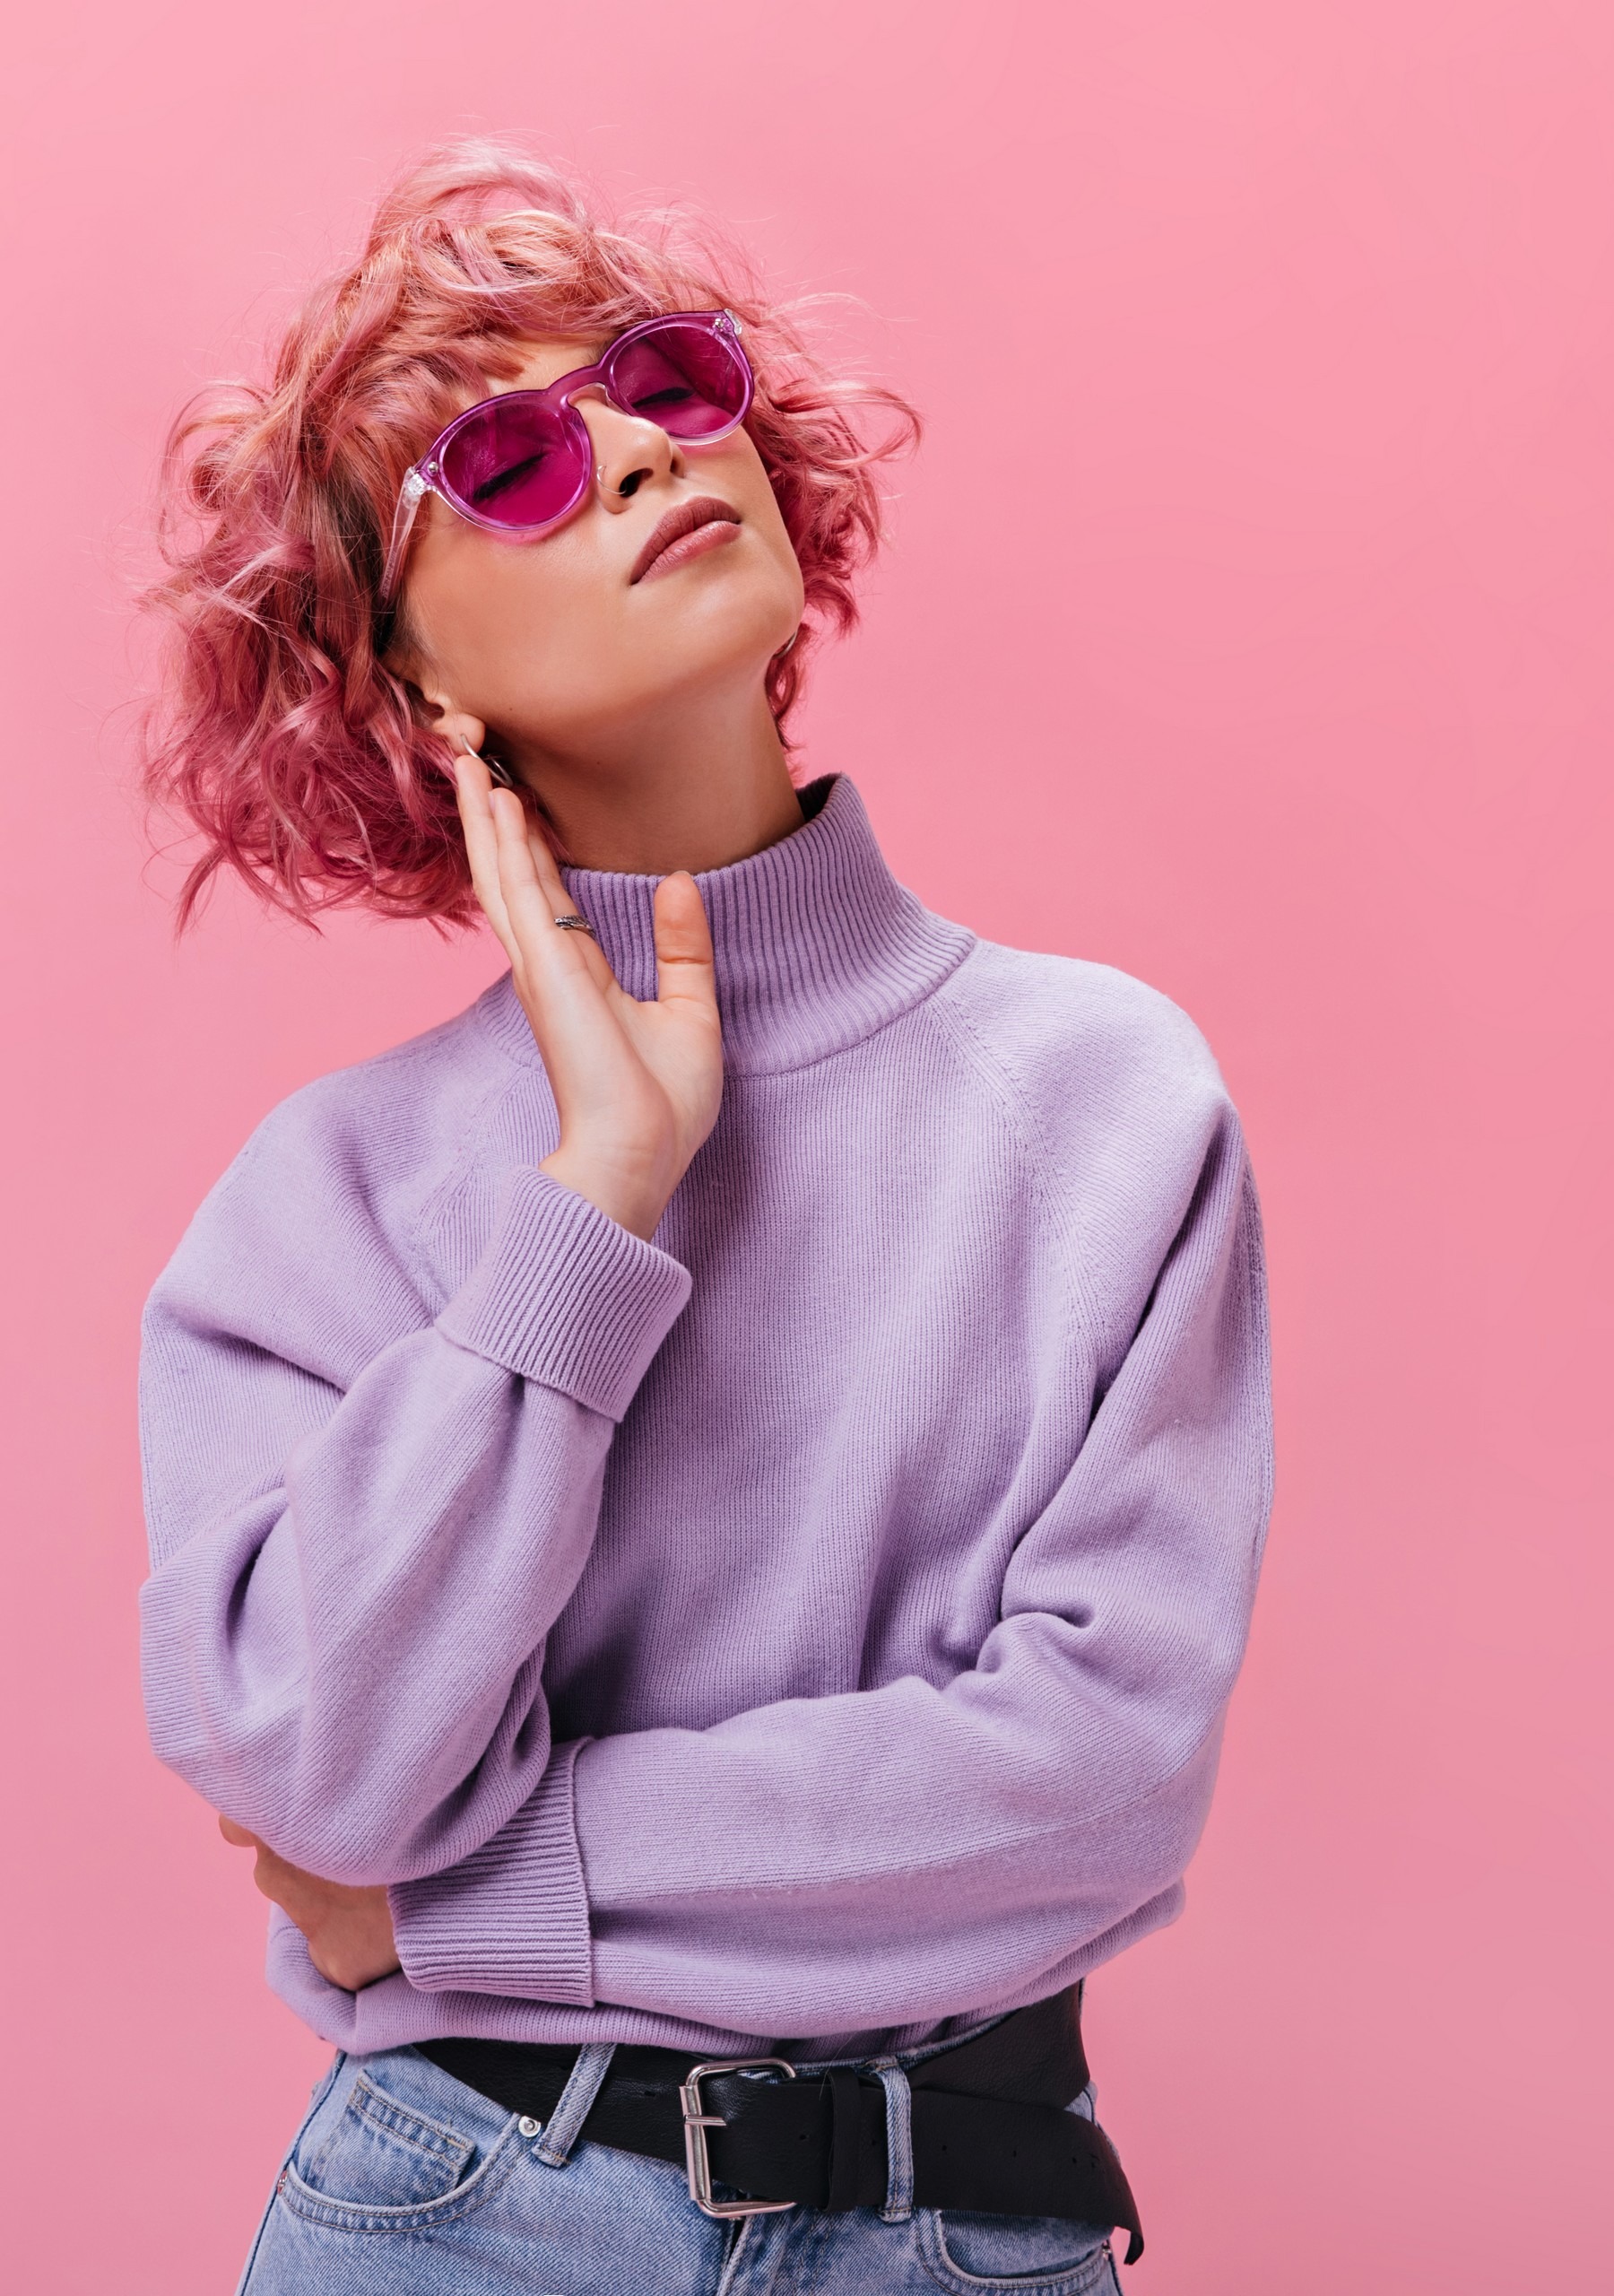 Attractive curly woman in purple cashmere sweater and fuchsia sunglasses poses on isolated background. Portrait of short-haired girl on pink backdrop .